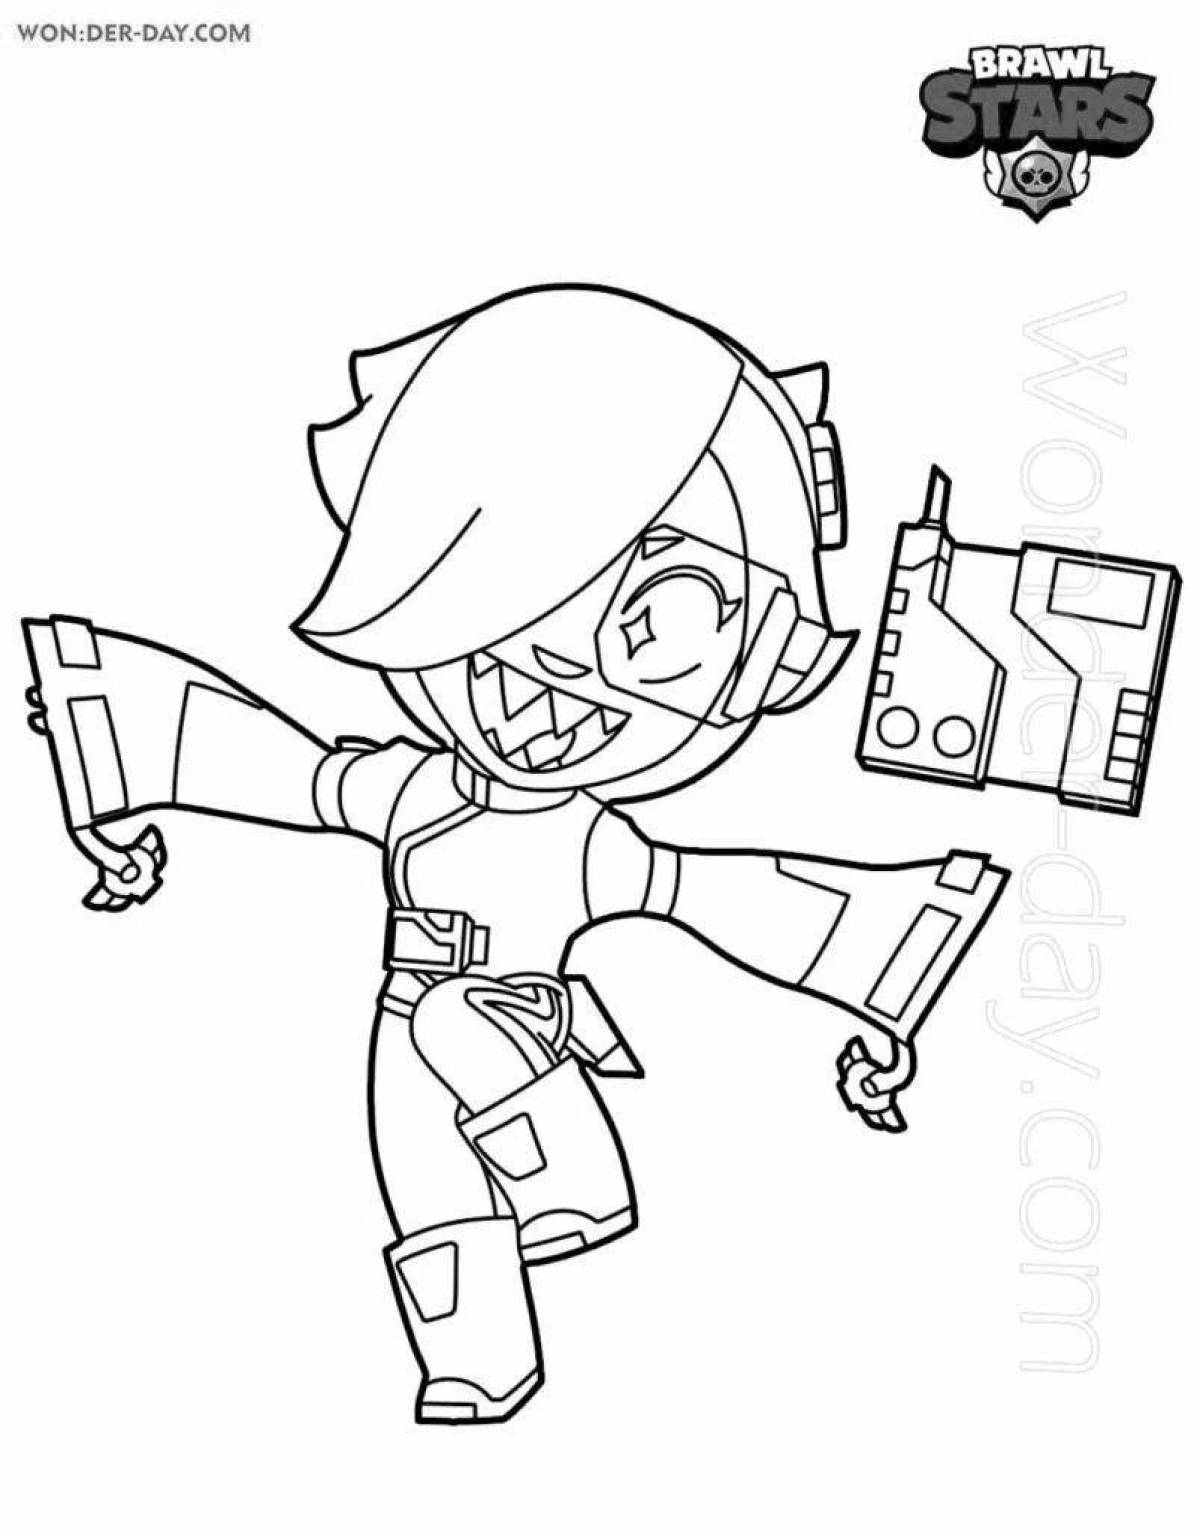 Collette from brawl stars #1